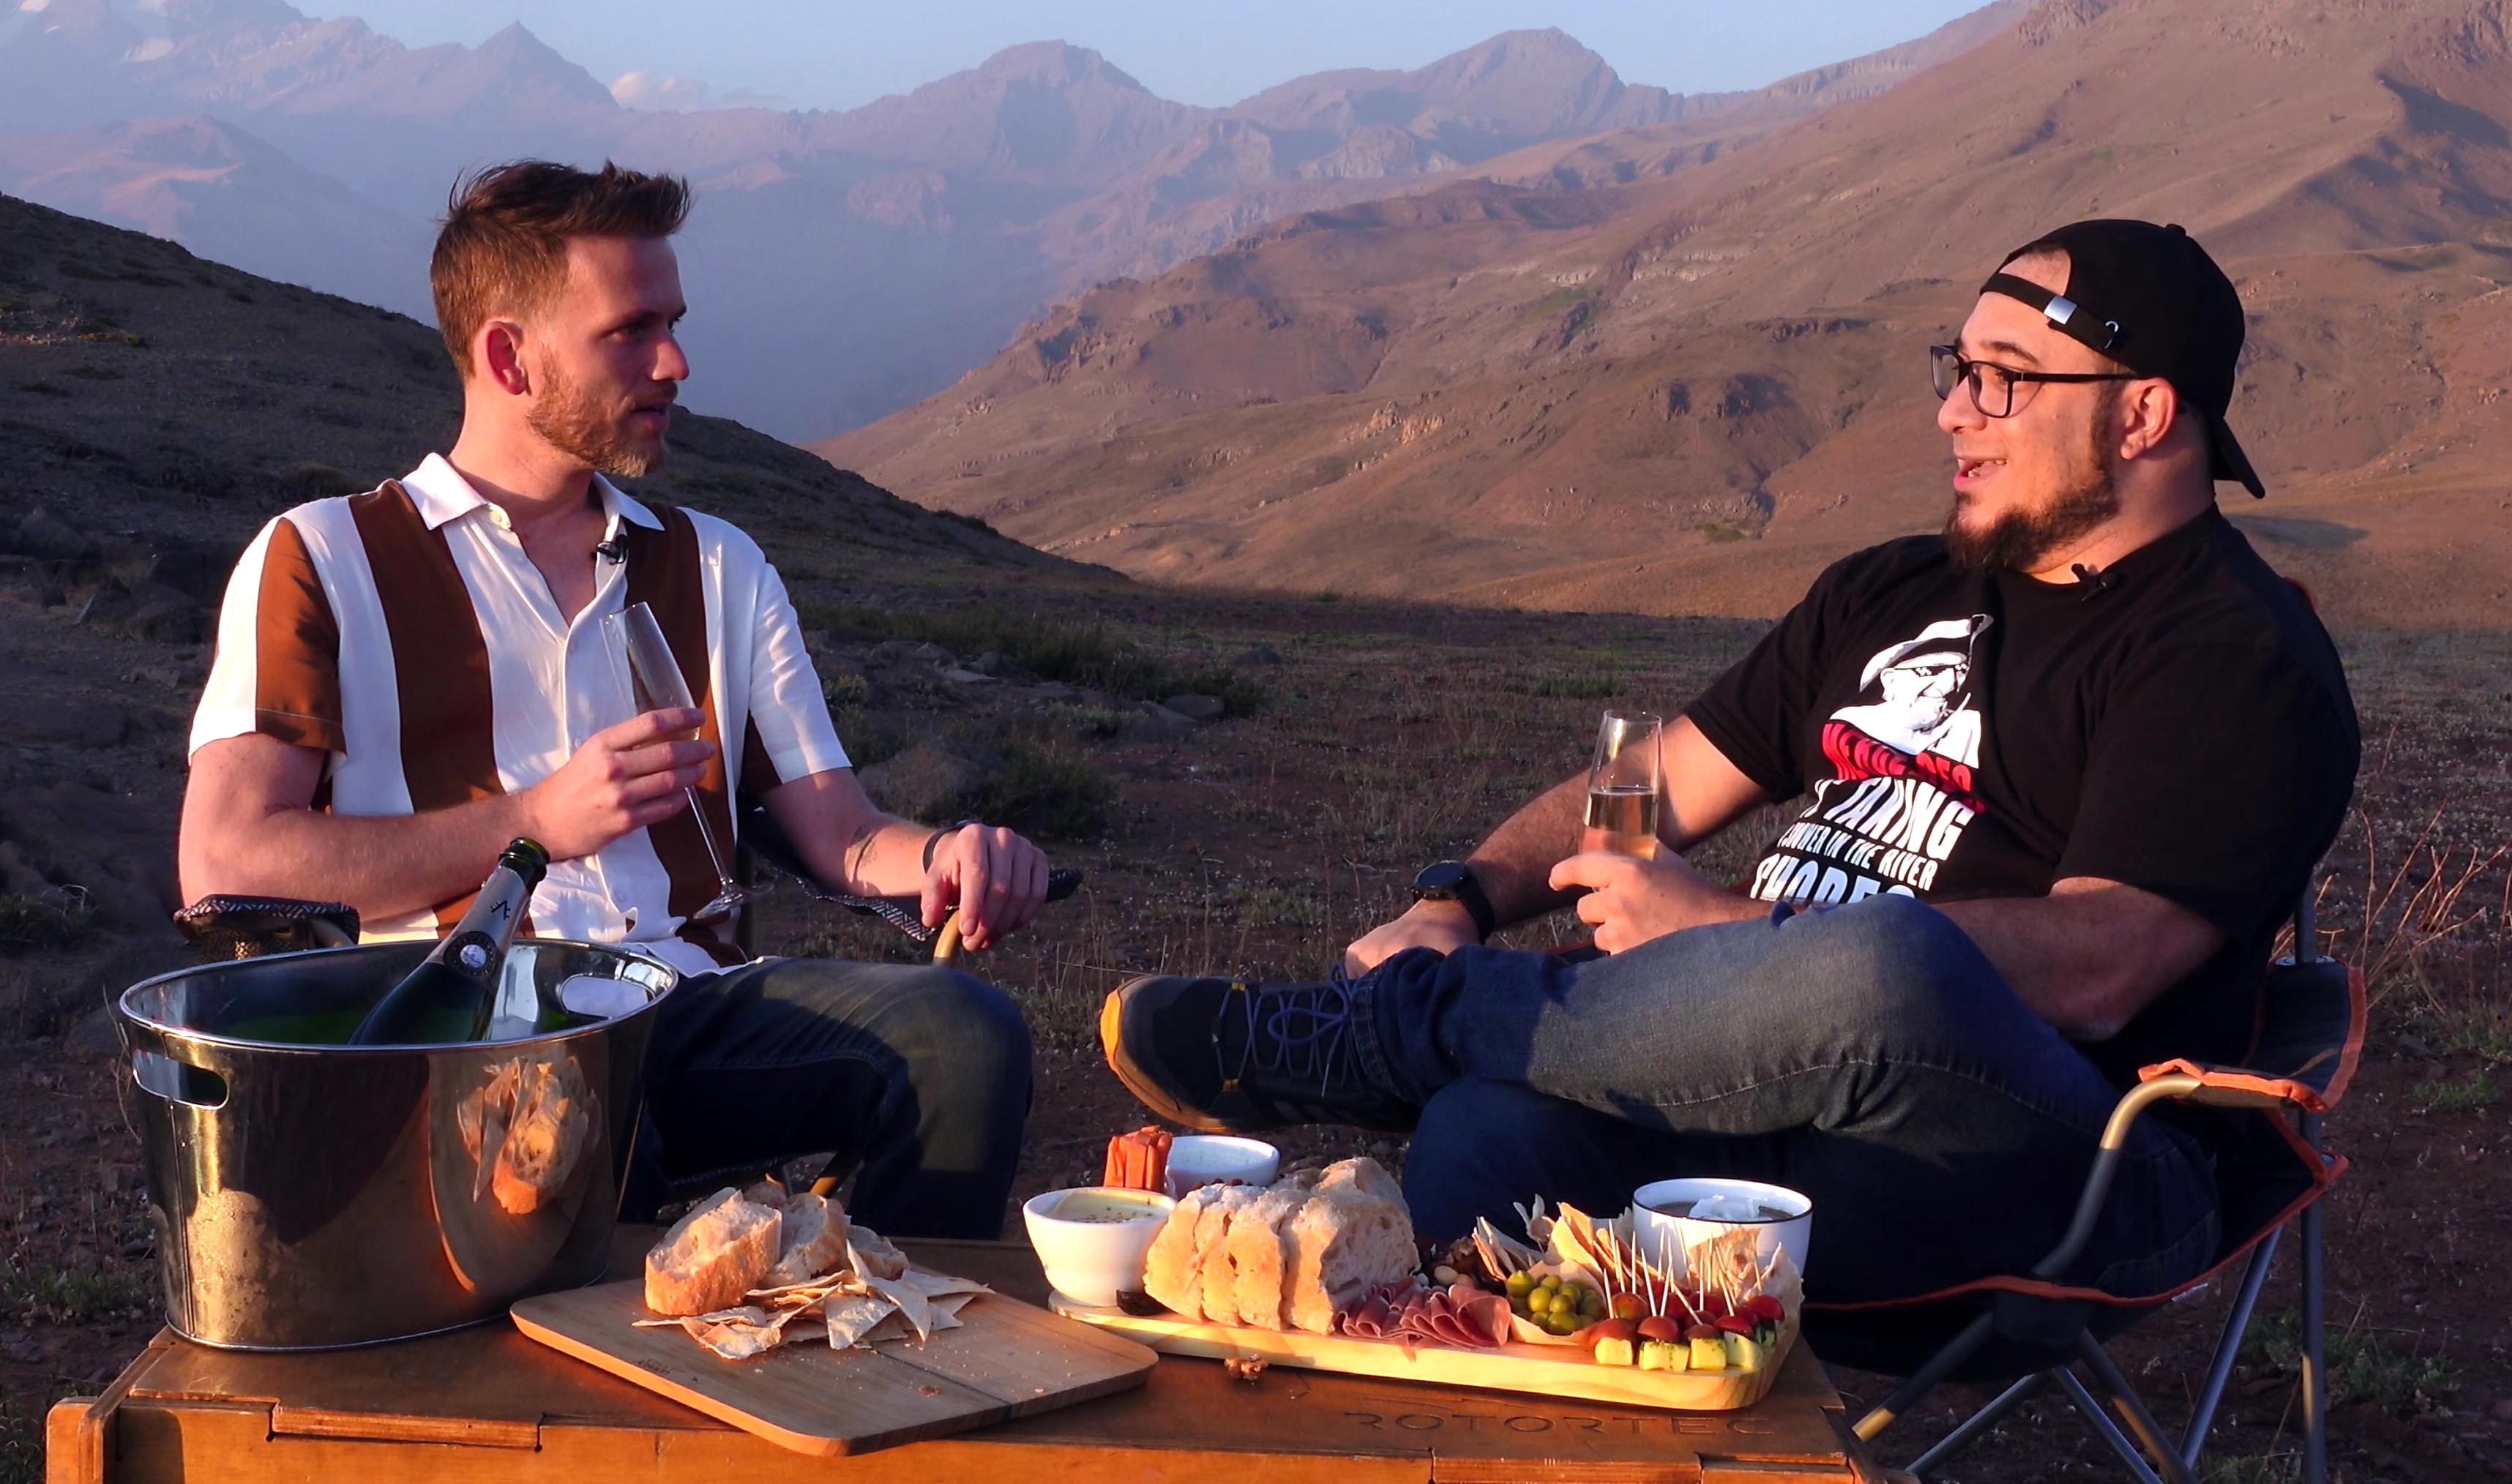 Andrew Allen and Xavier having a picnic on top of the Andes.